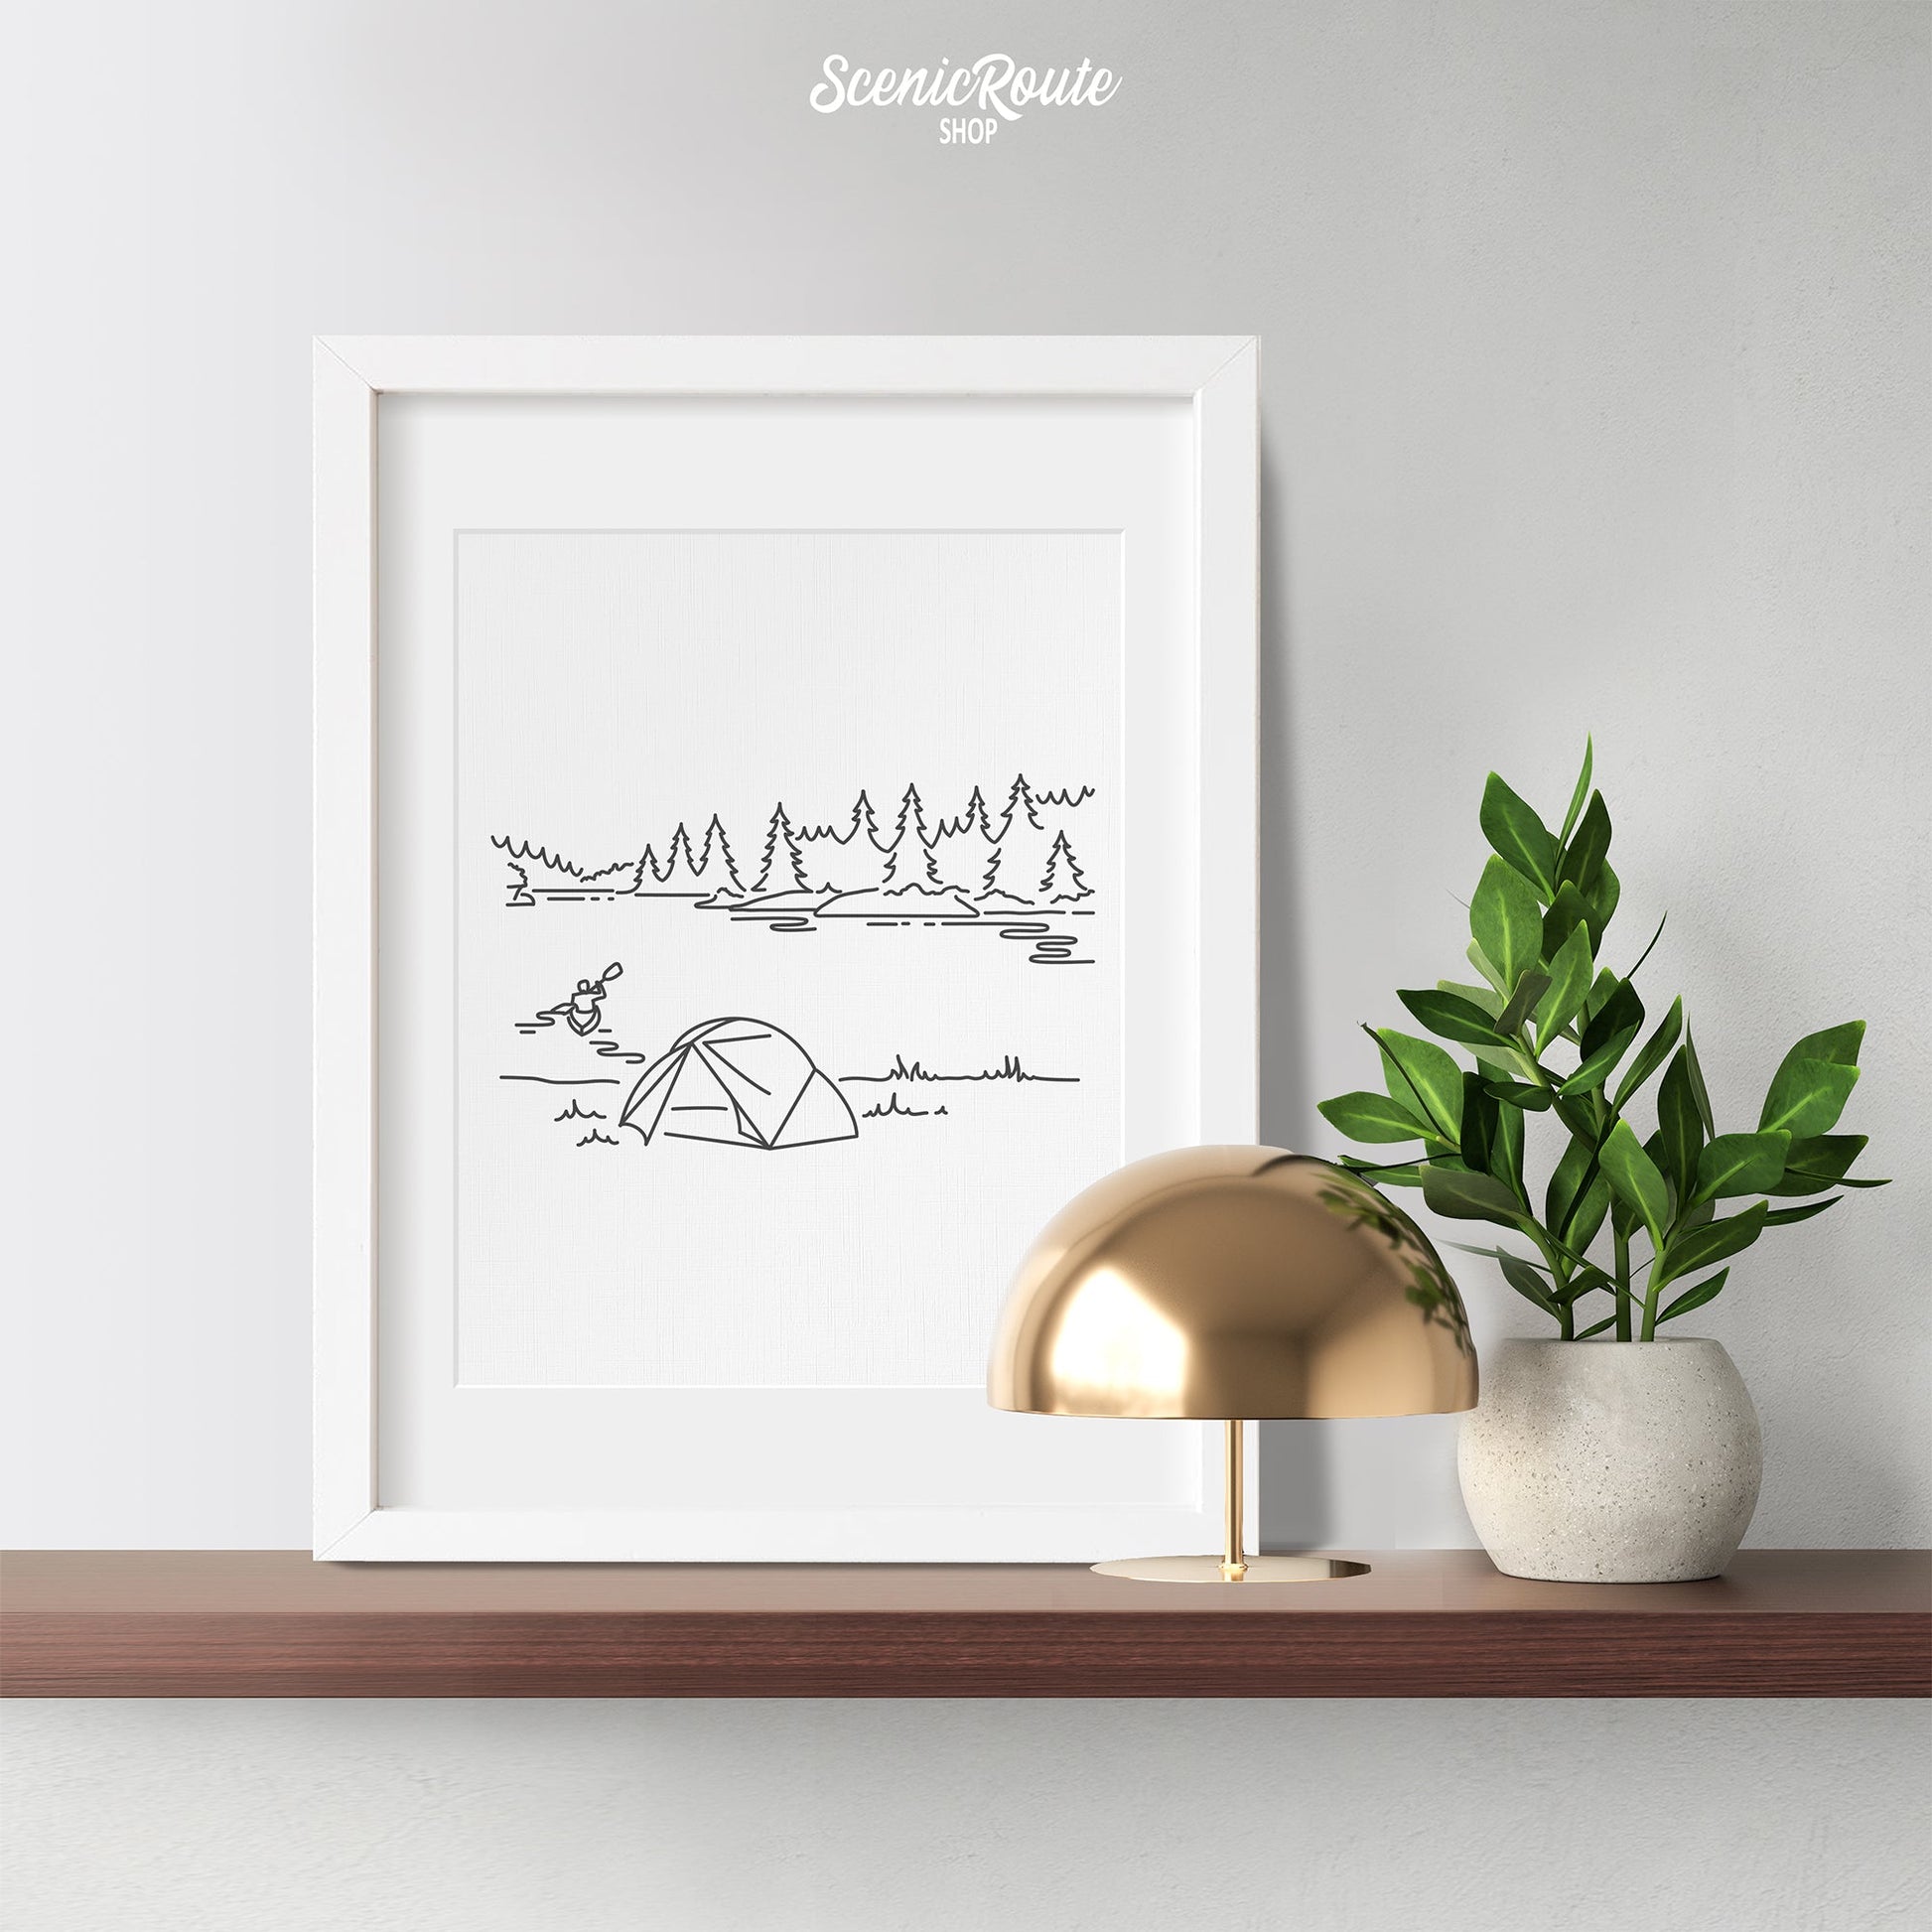 A framed line art drawing of Voyageurs National Park on a wood shelf with a lamp and plant